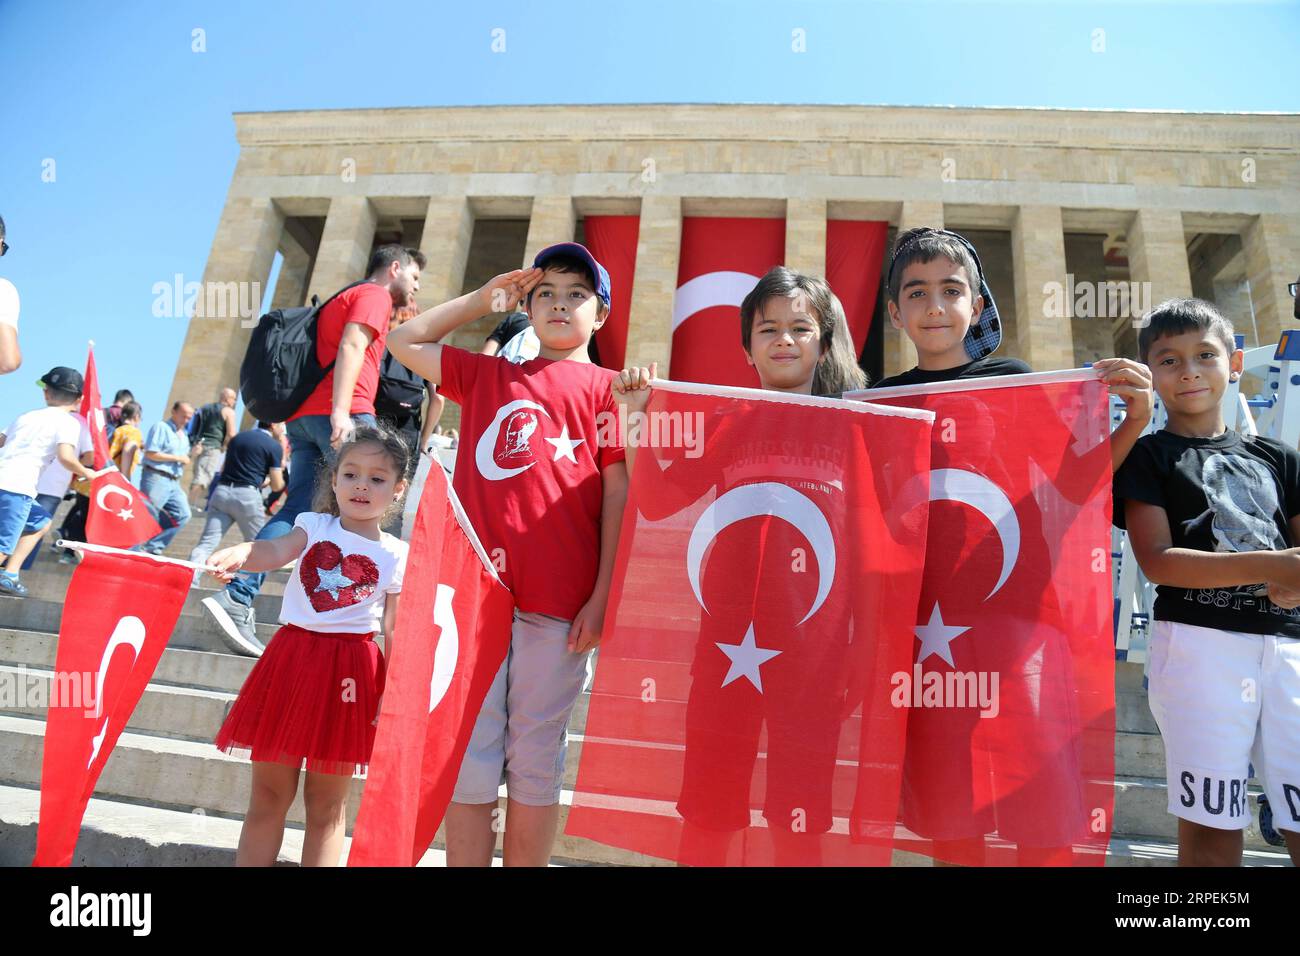 (190830) -- ANKARA, Aug. 30, 2019 -- The Turks celebrate the 97th anniversary of Victory Day at the Ataturk Mausoleum in Ankara, Turkey, Aug. 30, 2019. Turkey marked on Friday the 97th anniversary of Victory Day, the day the Turks defeated the Greek forces at the Battle of Dumlupinar, the final battle of the Turkish War of Independence in 1922. (Photo by /Xinhua) TURKEY-ANKARA-VICTORY DAY MustafaxKaya PUBLICATIONxNOTxINxCHN Stock Photo